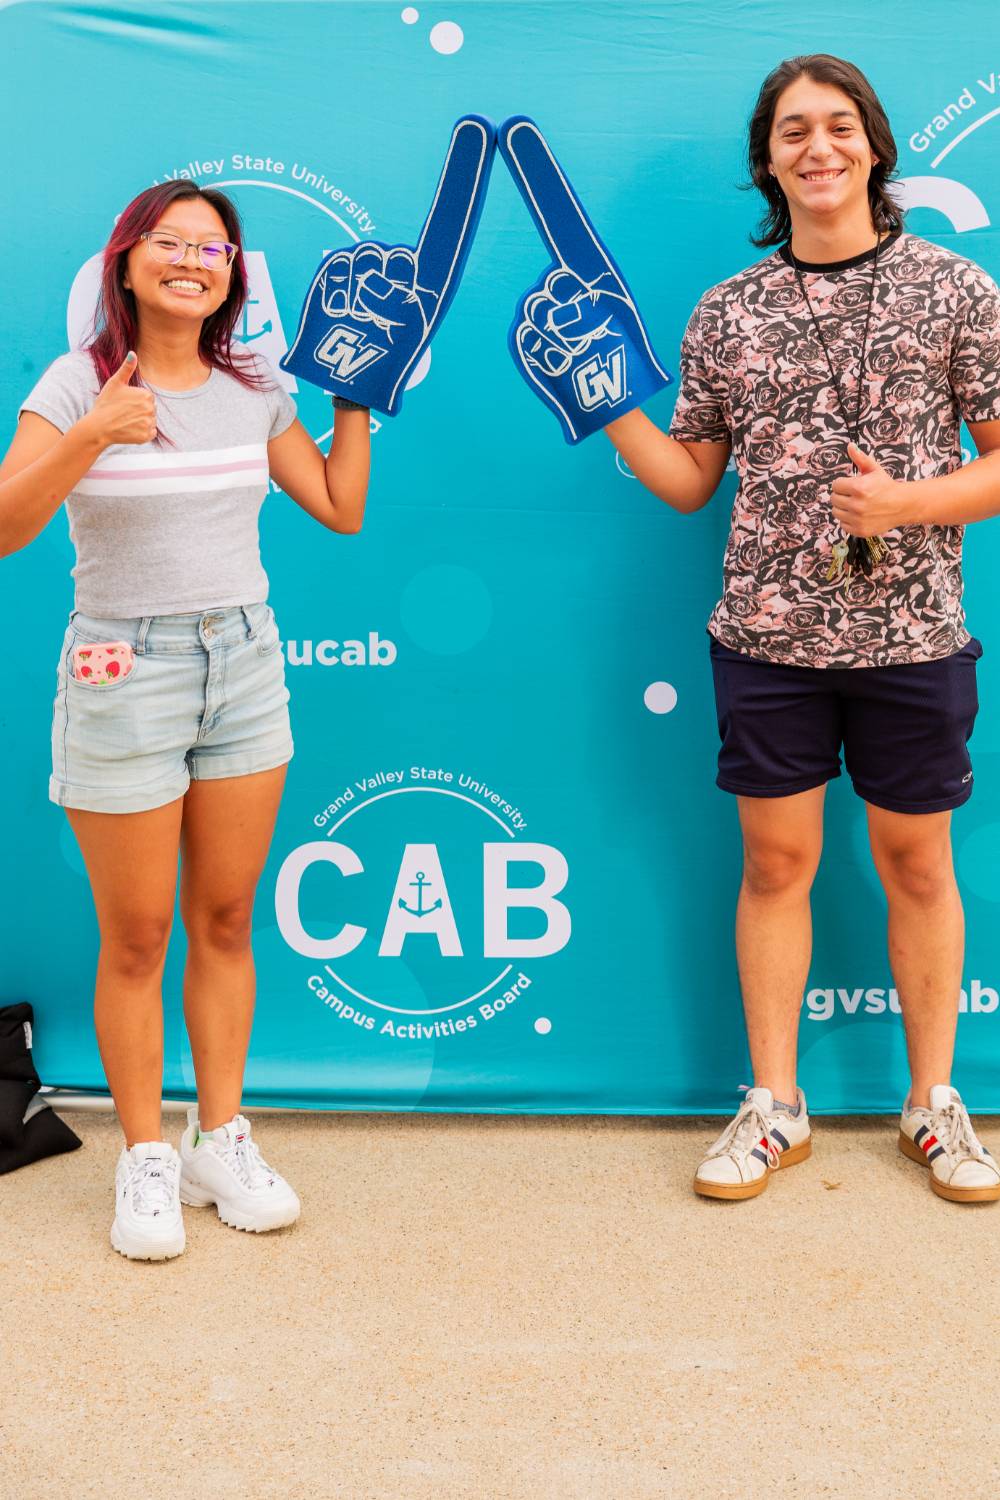 students holding foam fingers and posing in front of CAB backdrop at Laker Kickoff photo booth